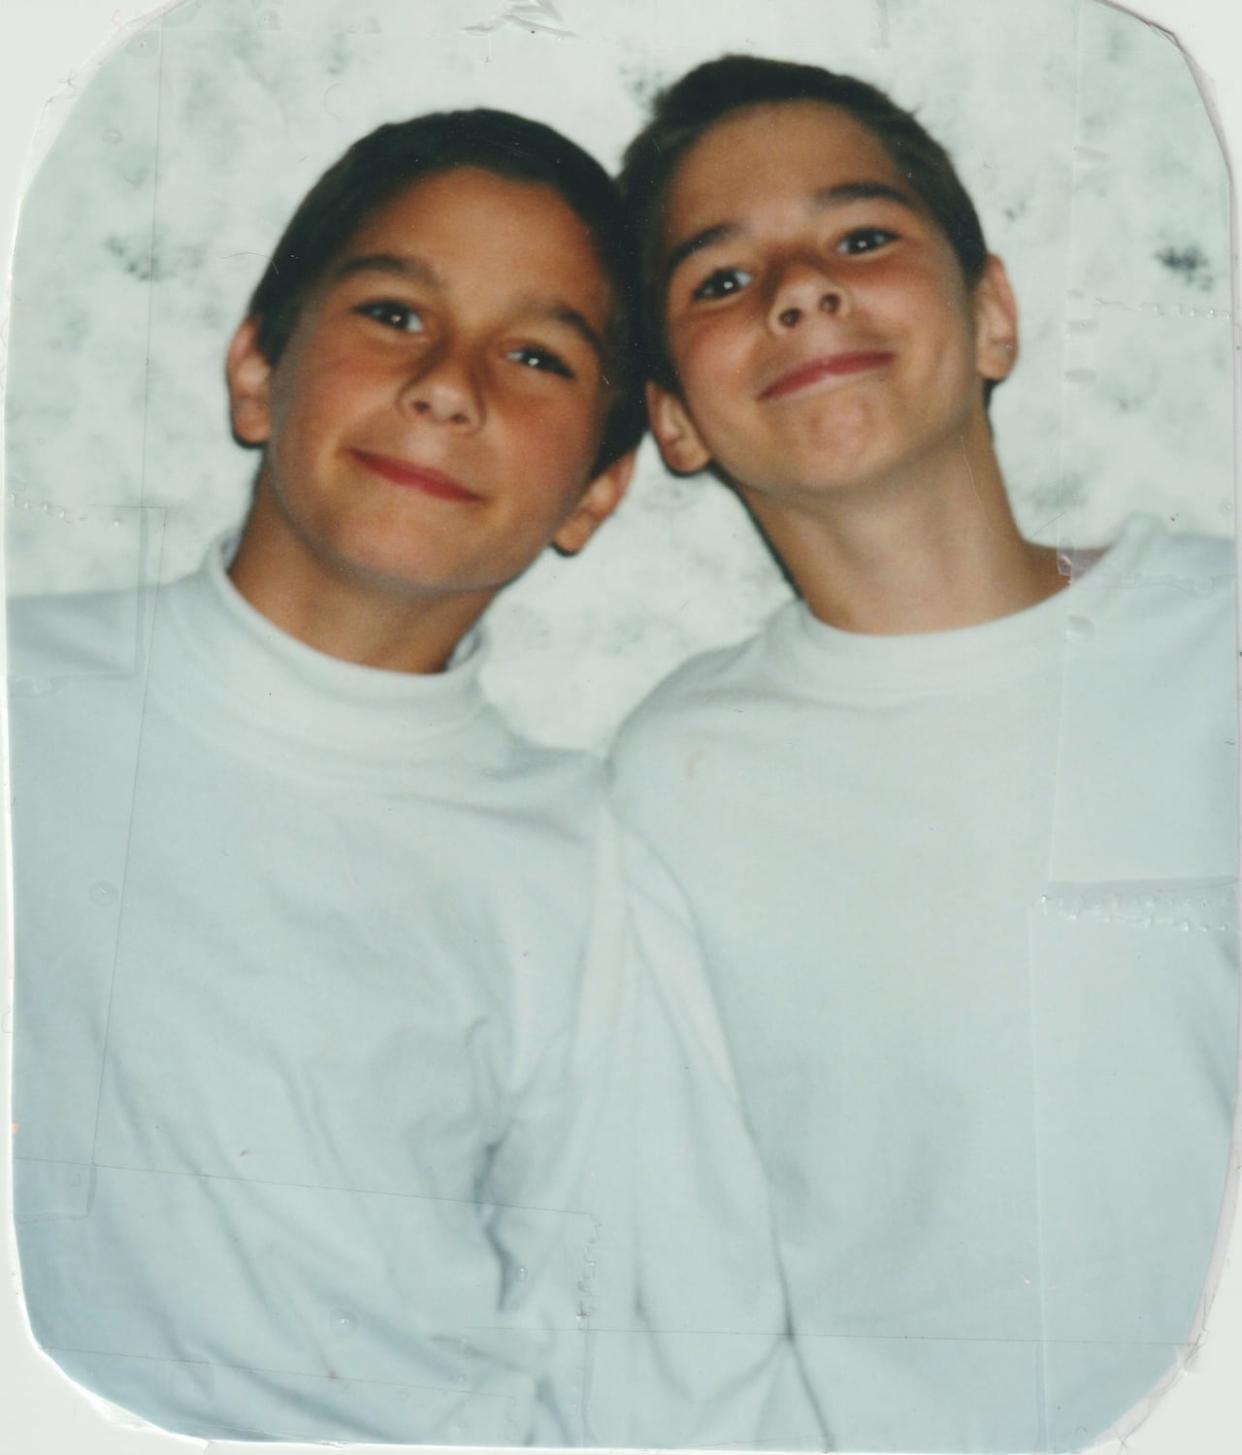 Attila Csanyi, left, with his twin brother Richard as children. They spent part of their childhood in foster care in Toronto. Richard testified on the second day of the inquest into his brother's death four years ago.  (Submitted by Nisus Pictures - image credit)